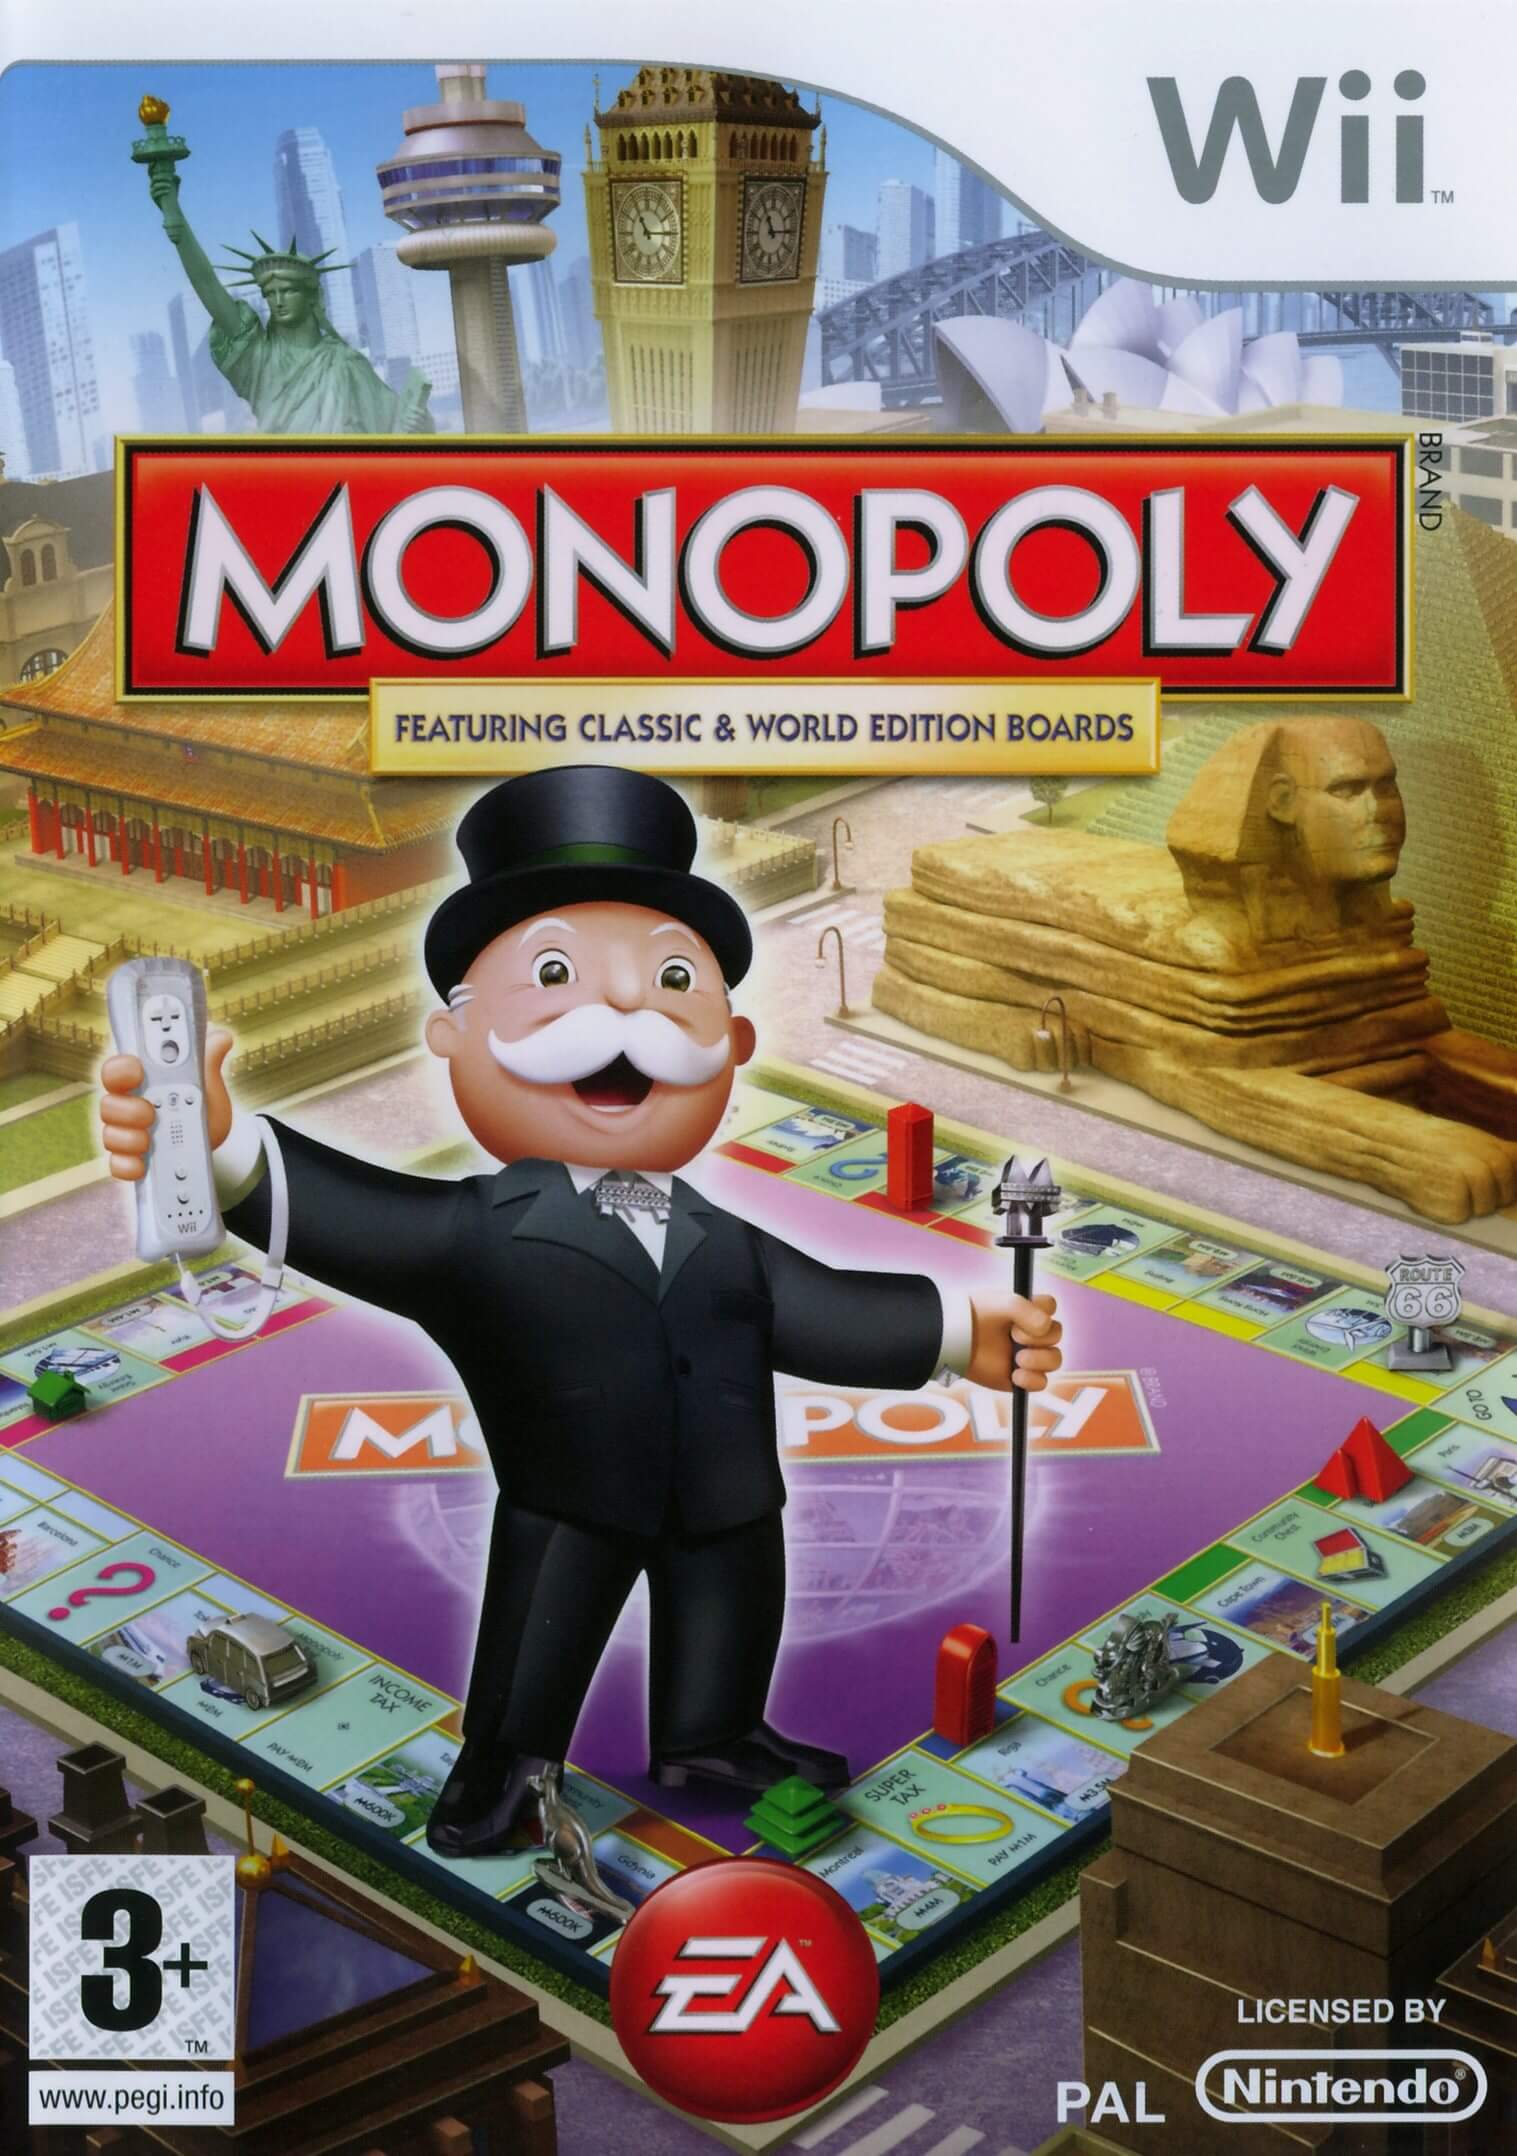 monopoly 2008 pc game download